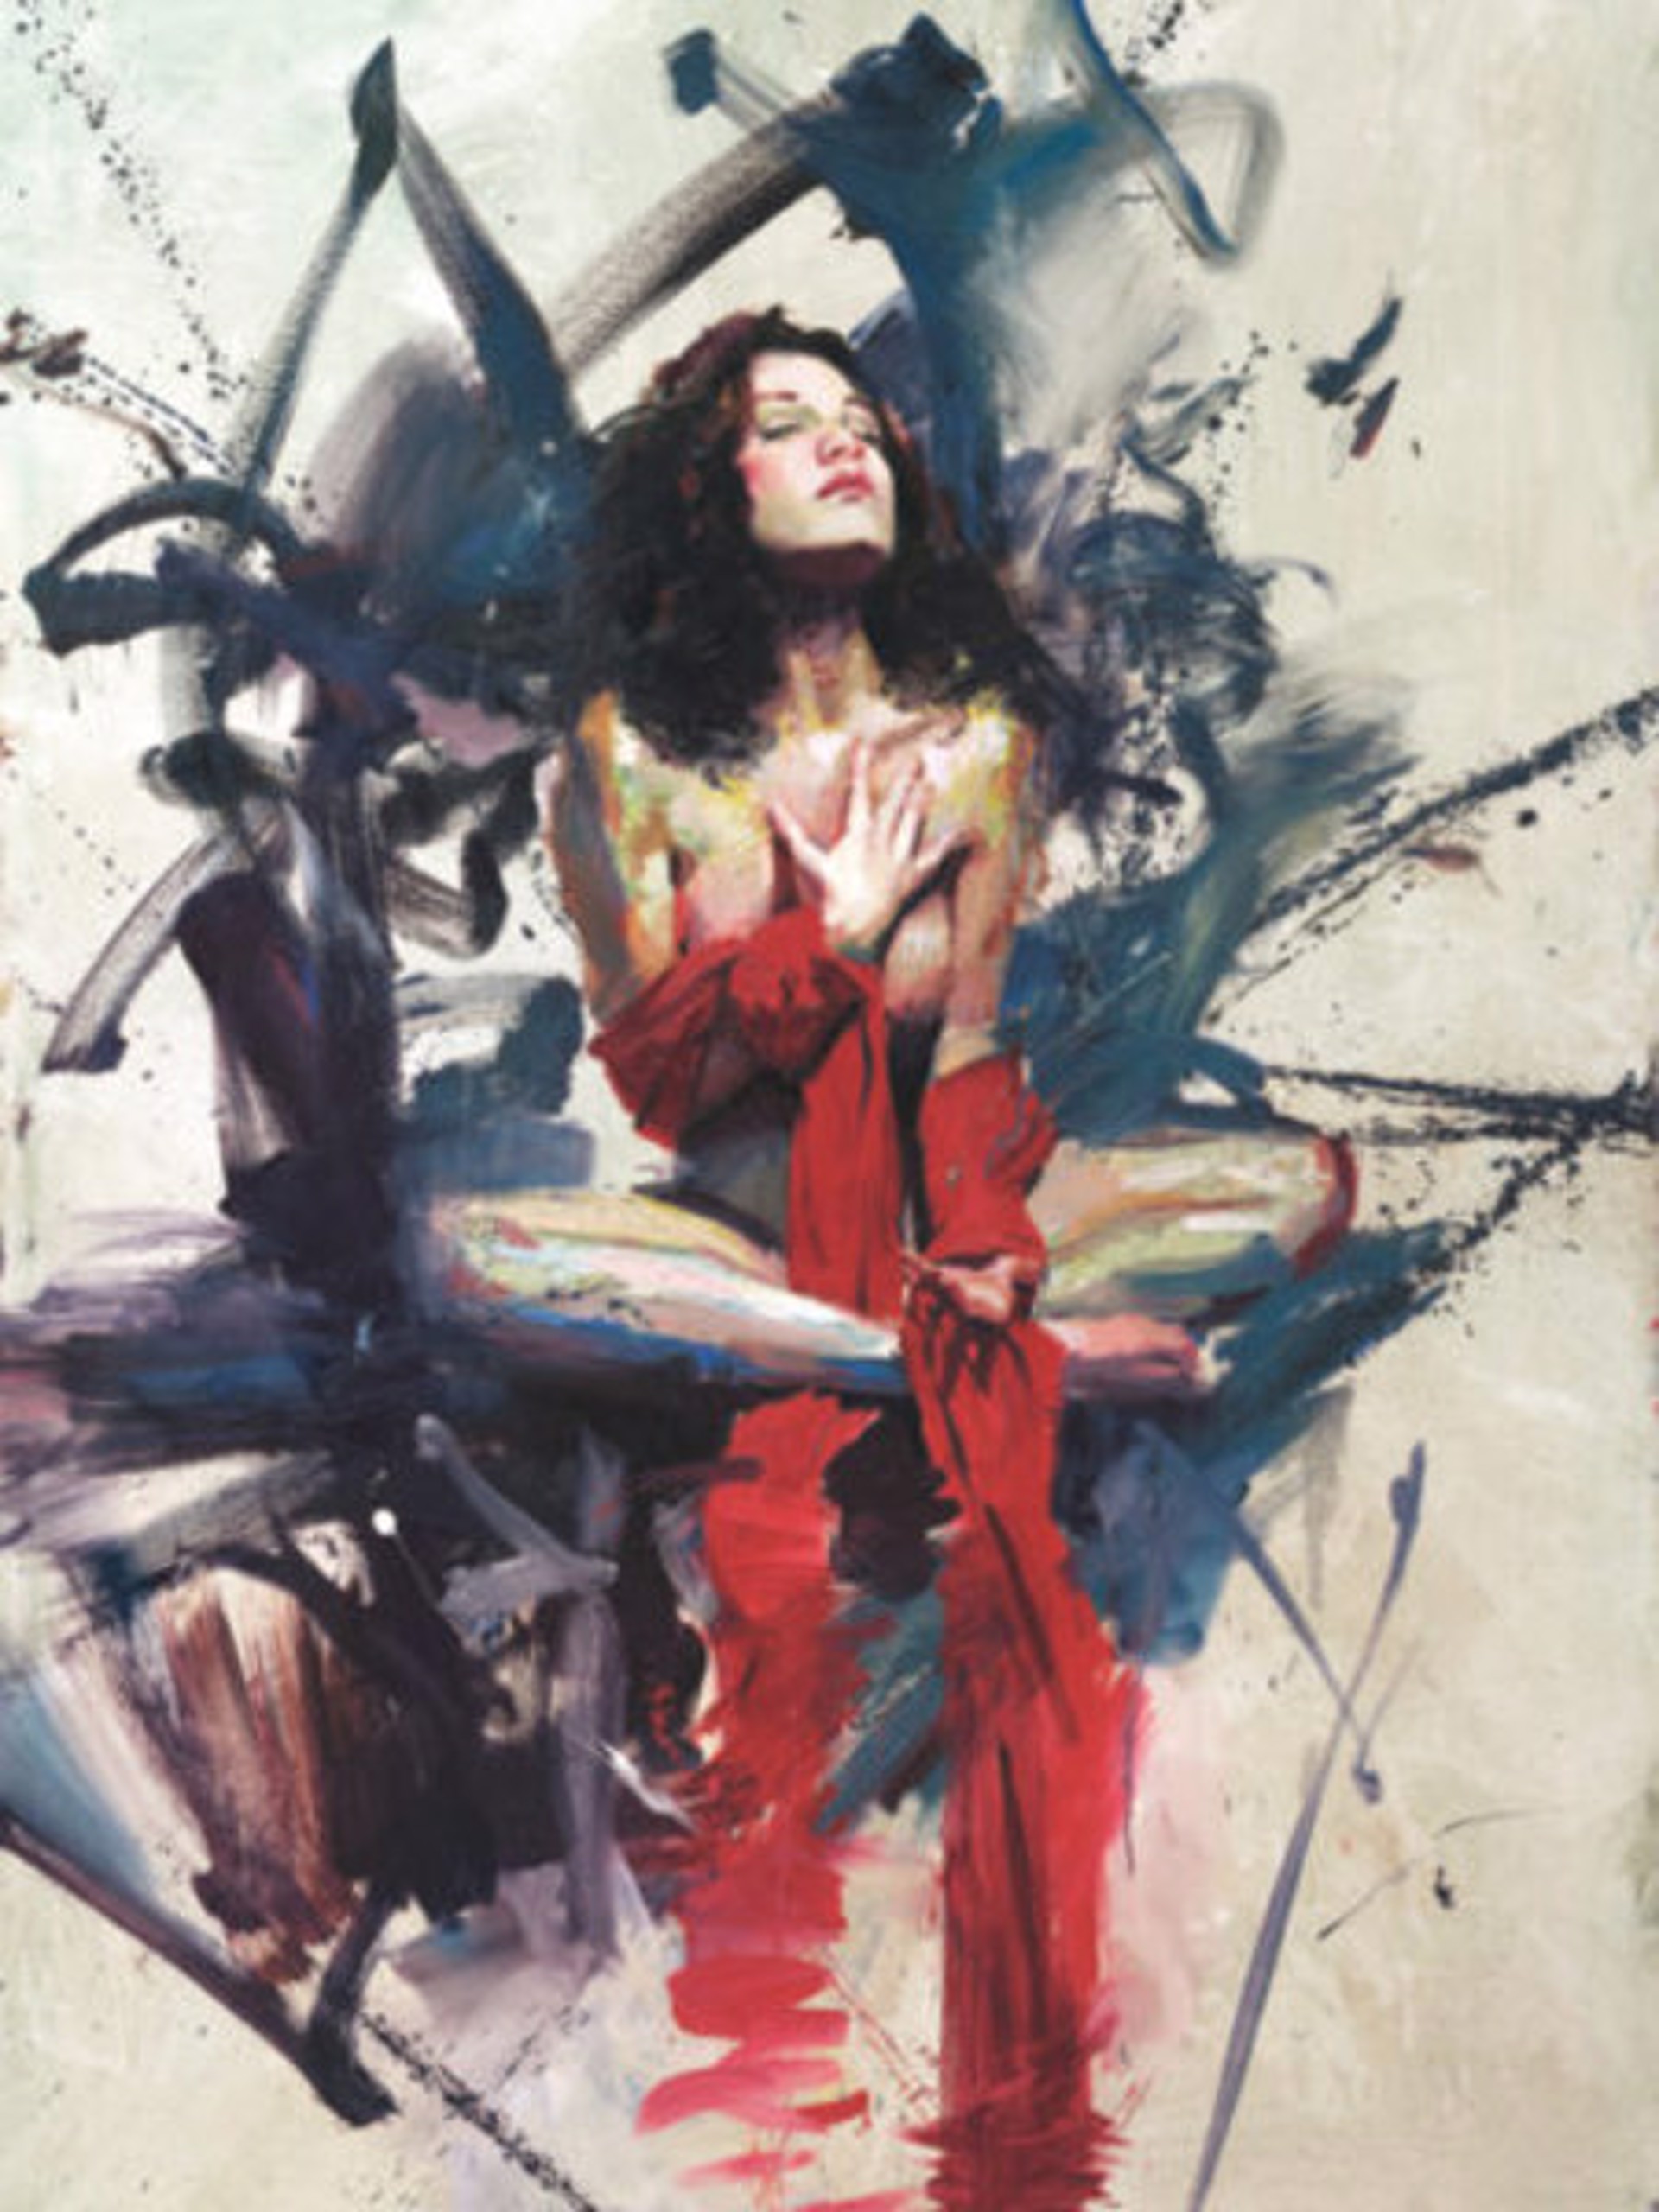 Recognition by Henry Asencio